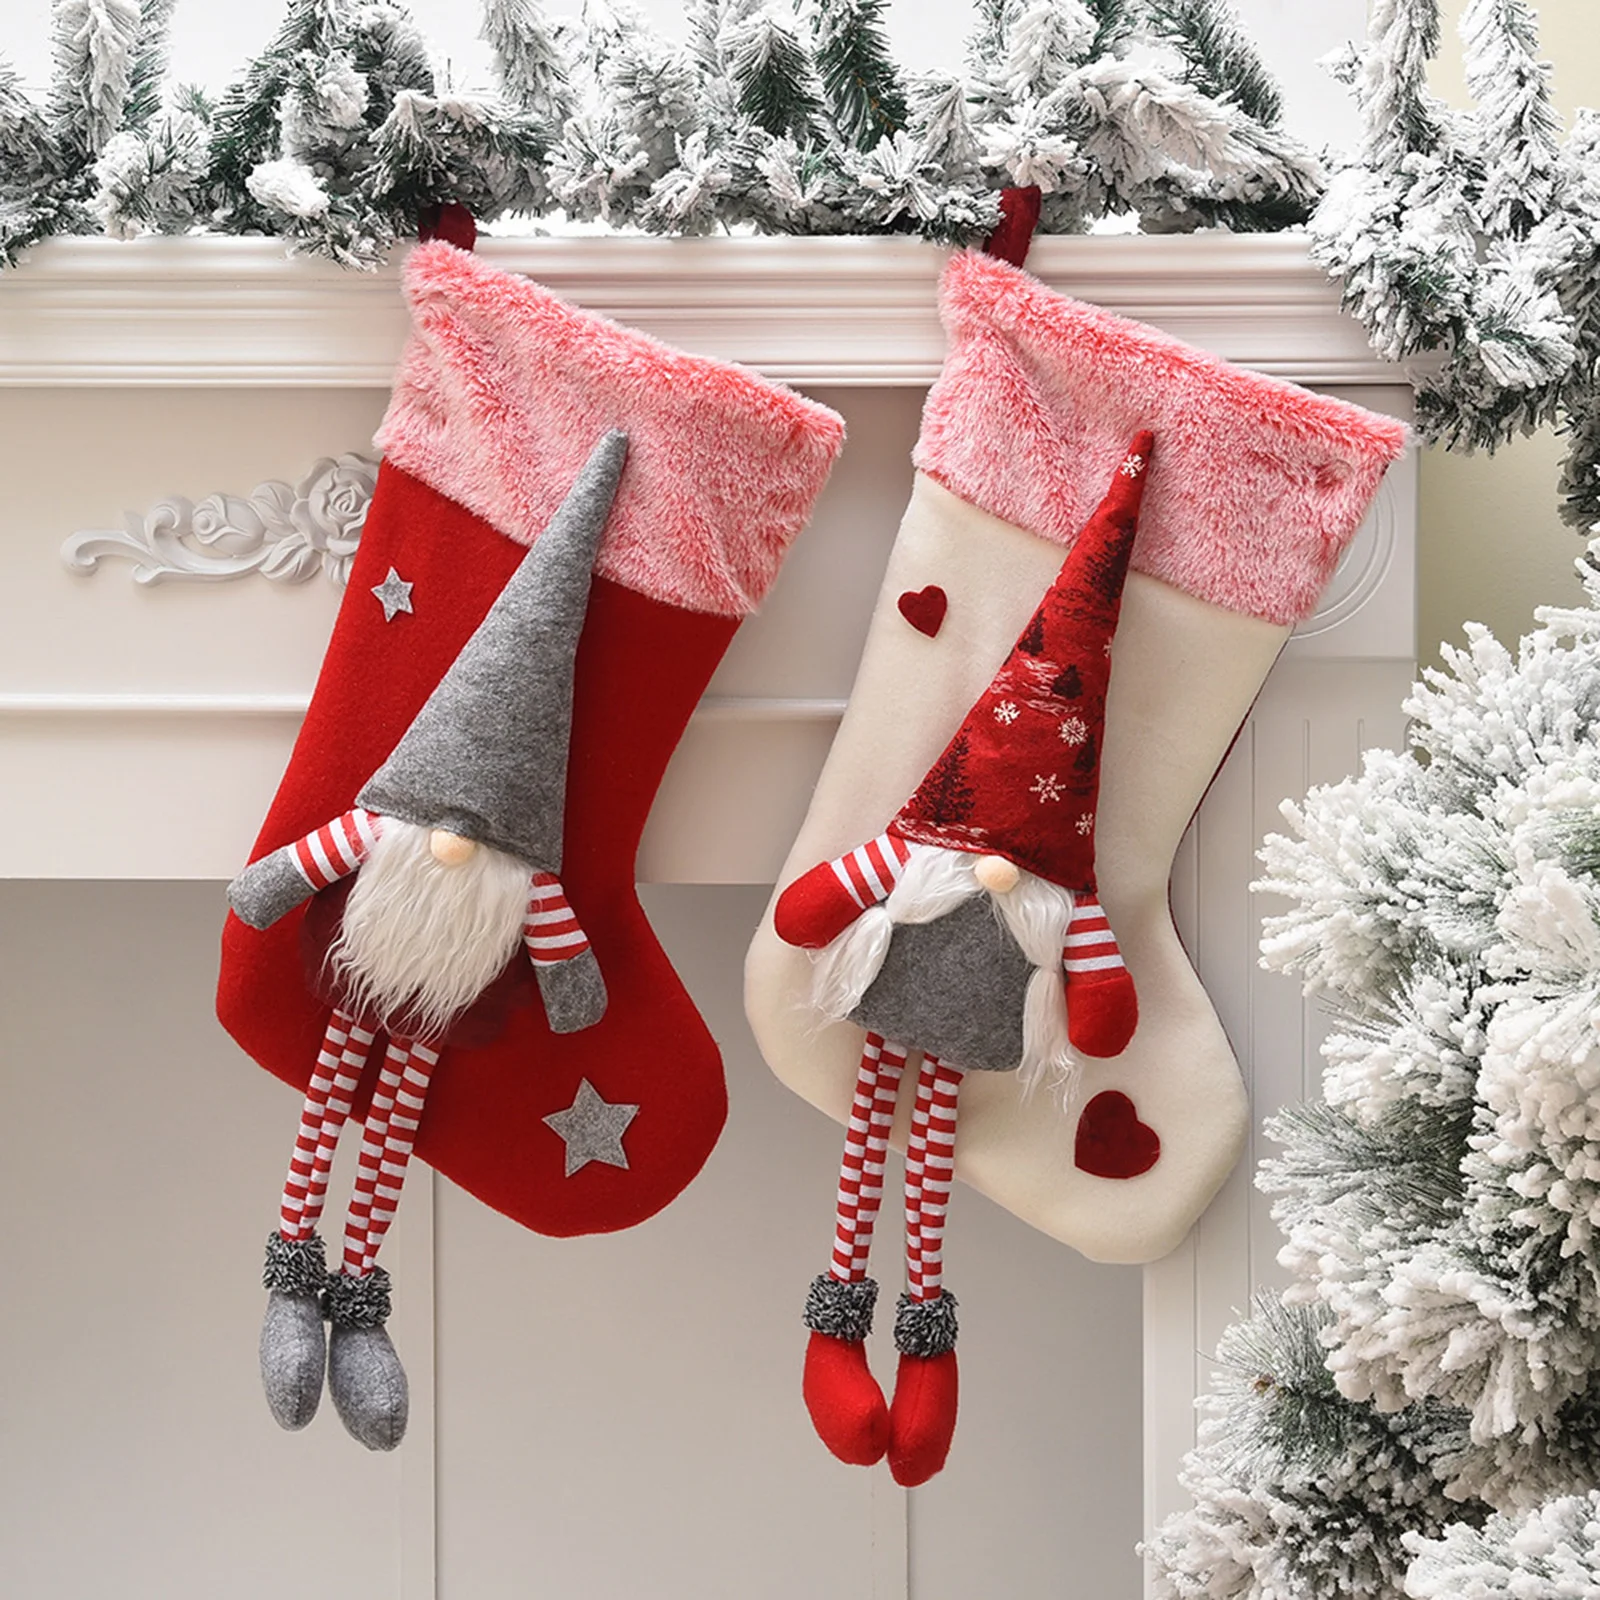 

Christmas Decorations, Faceless Santa Claus Patterns Sock Shaped Gift Bag Ornament for Home Shops, Red/White